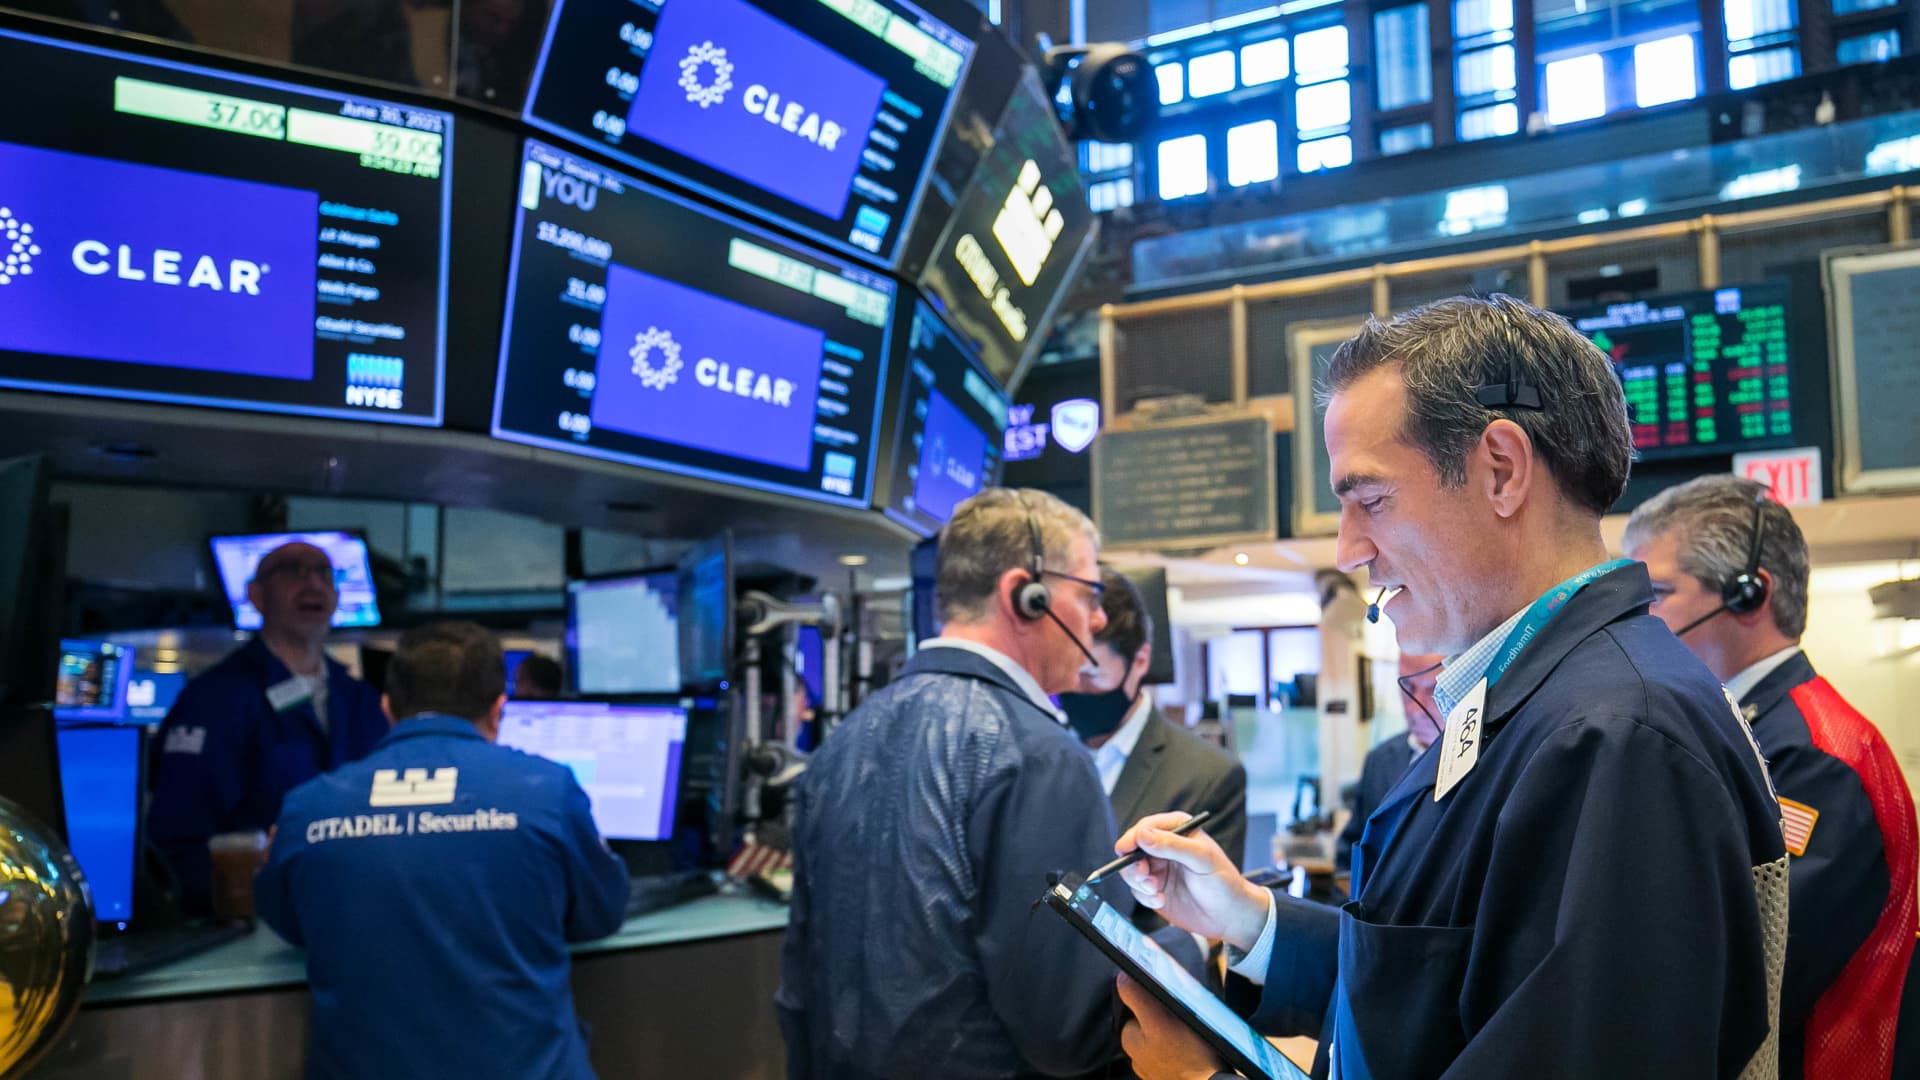 The New York Stock Exchange welcomes executives and guests of Clear Secure, Inc. (NYSE: YOU), on June 30, 2021, in celebration of its Initial Public Offering.